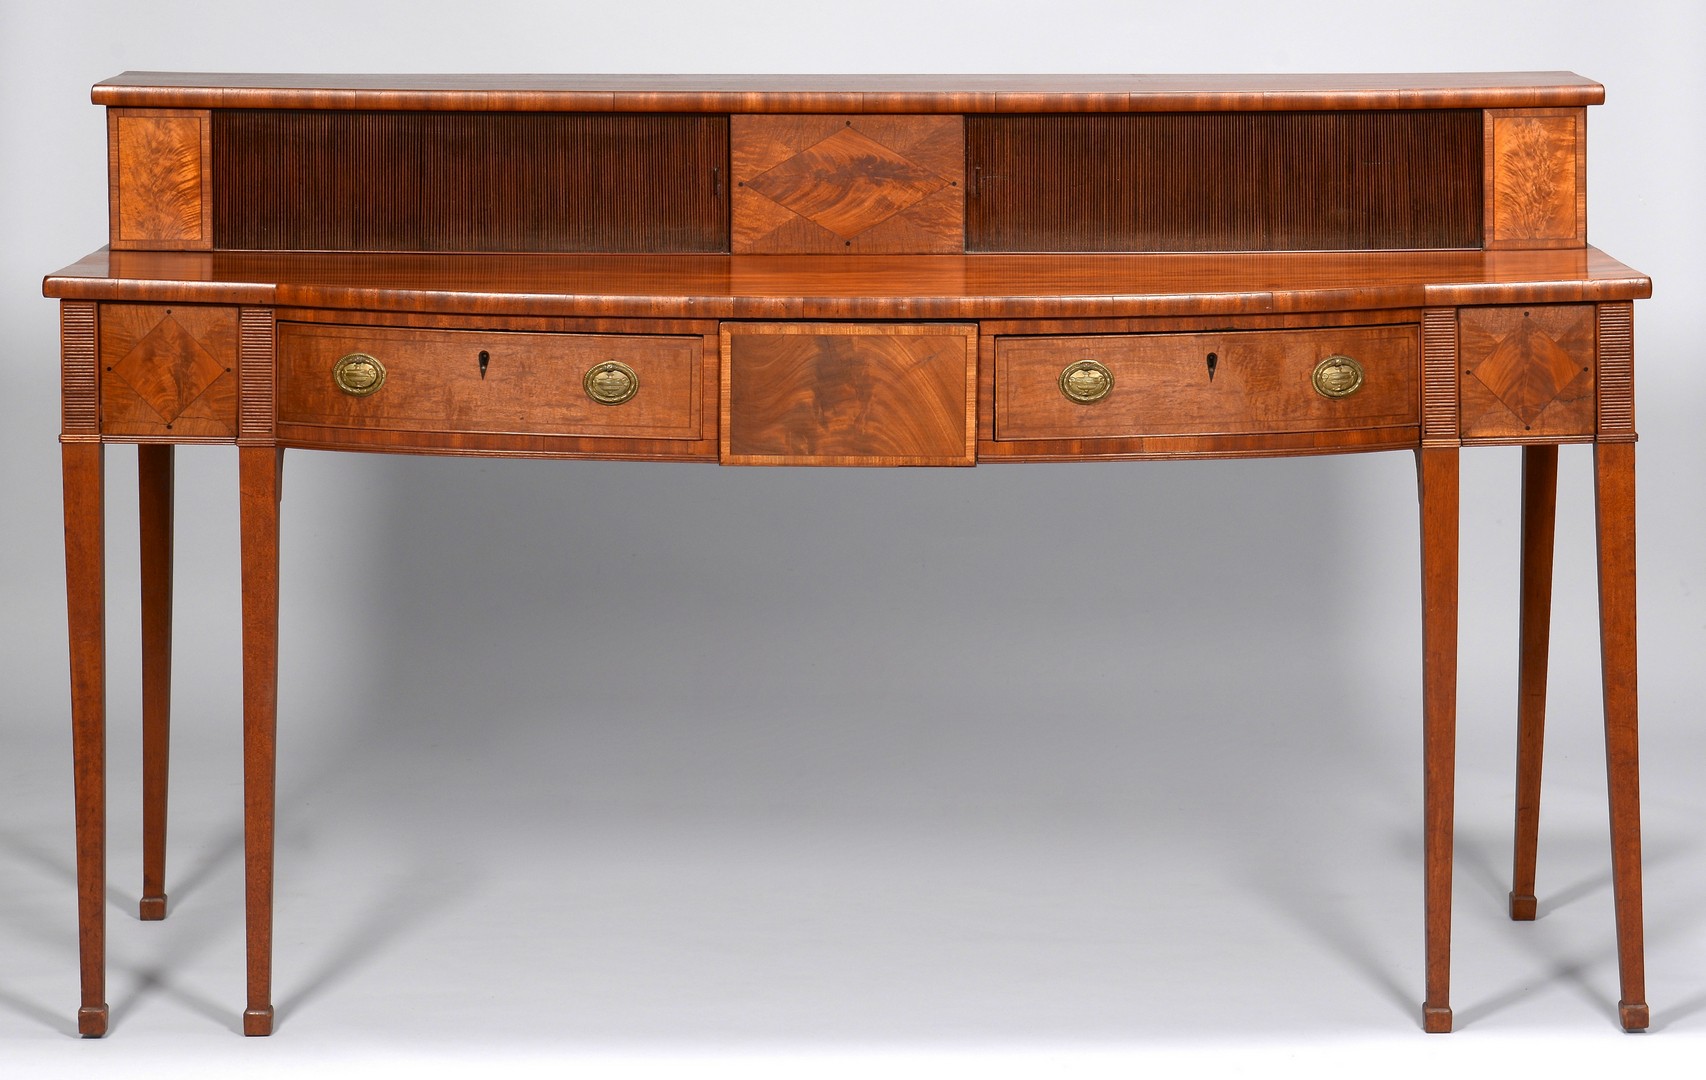 Lot 276: English Inlaid Sideboard with Tambour doors